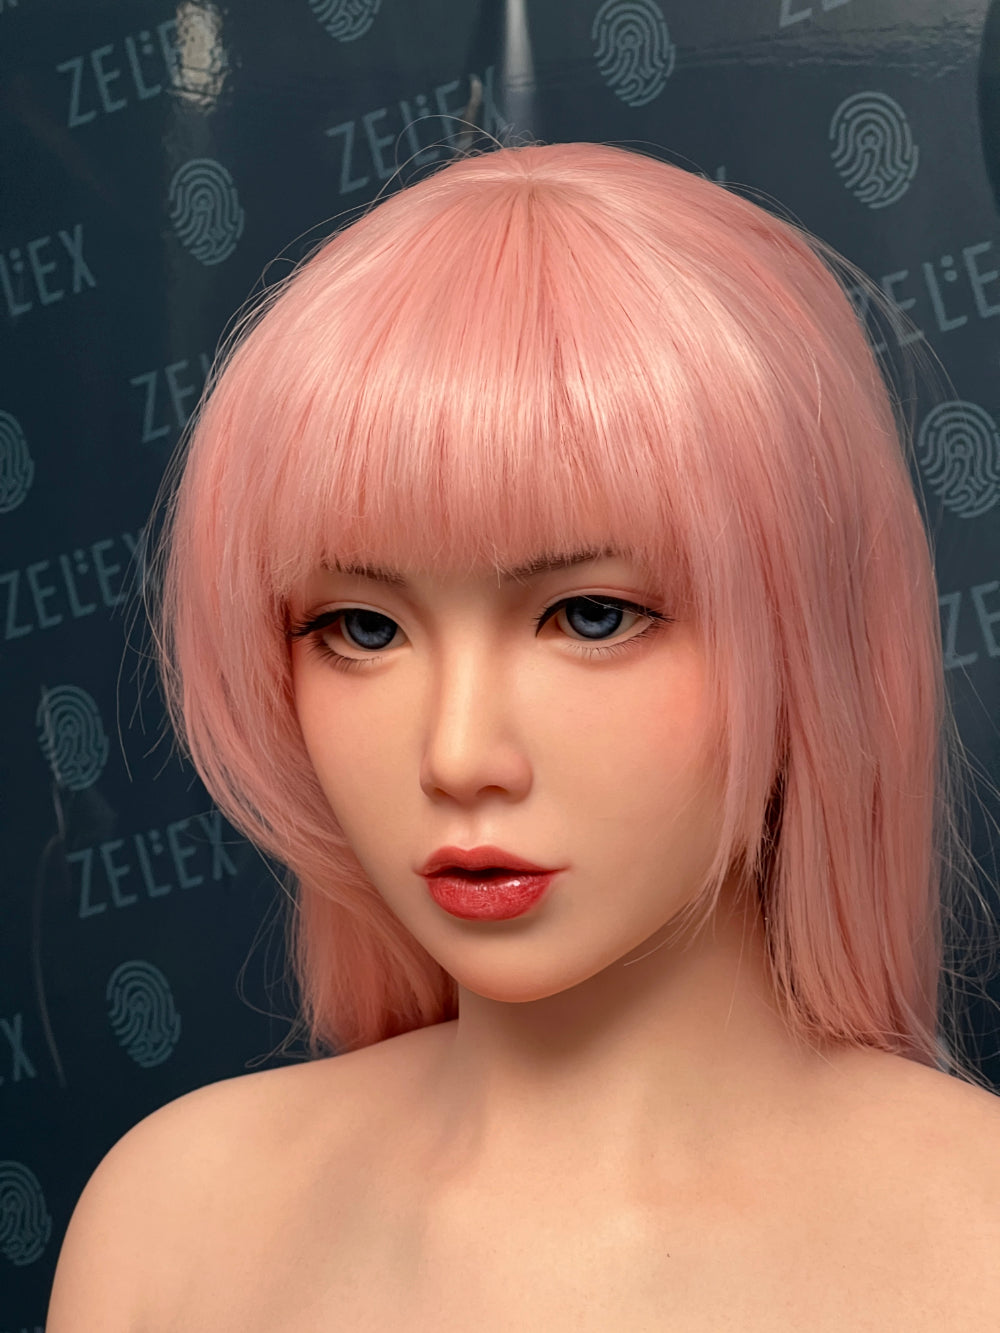 Zelex Doll X165 cm F Silicone - Benna | Buy Sex Dolls at DOLLS ACTUALLY